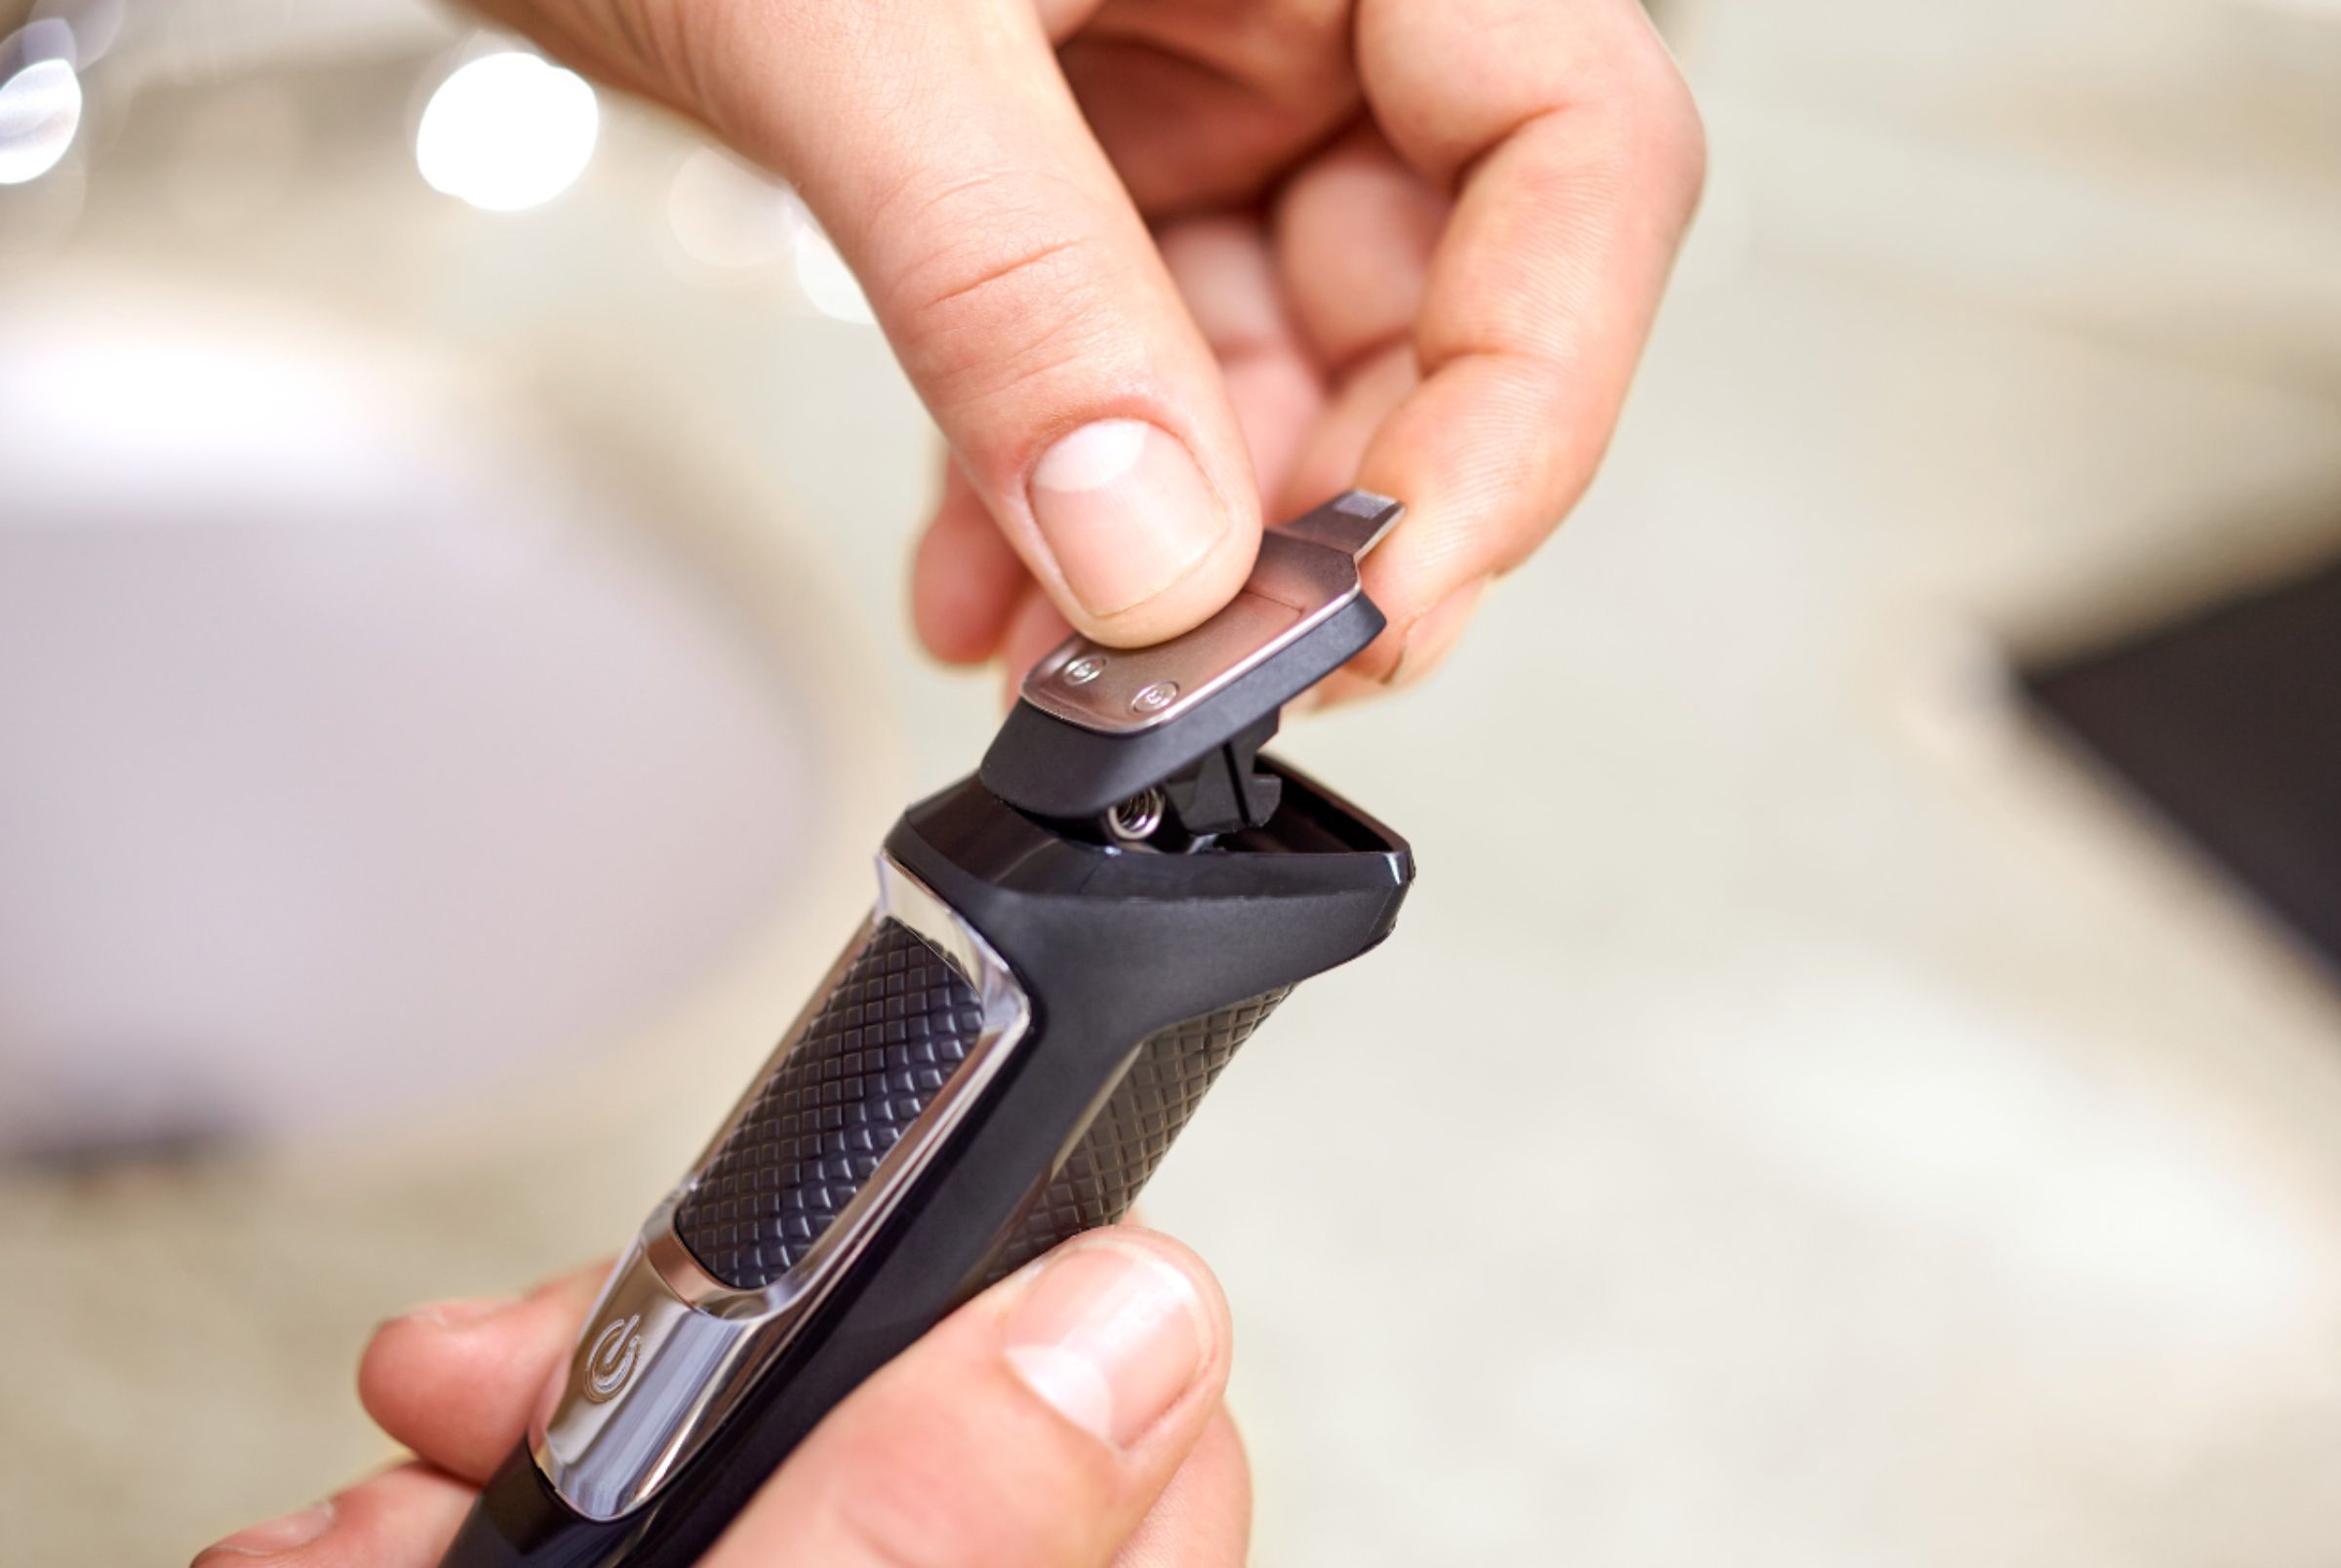 philips all in one trimmer multigroom 3000